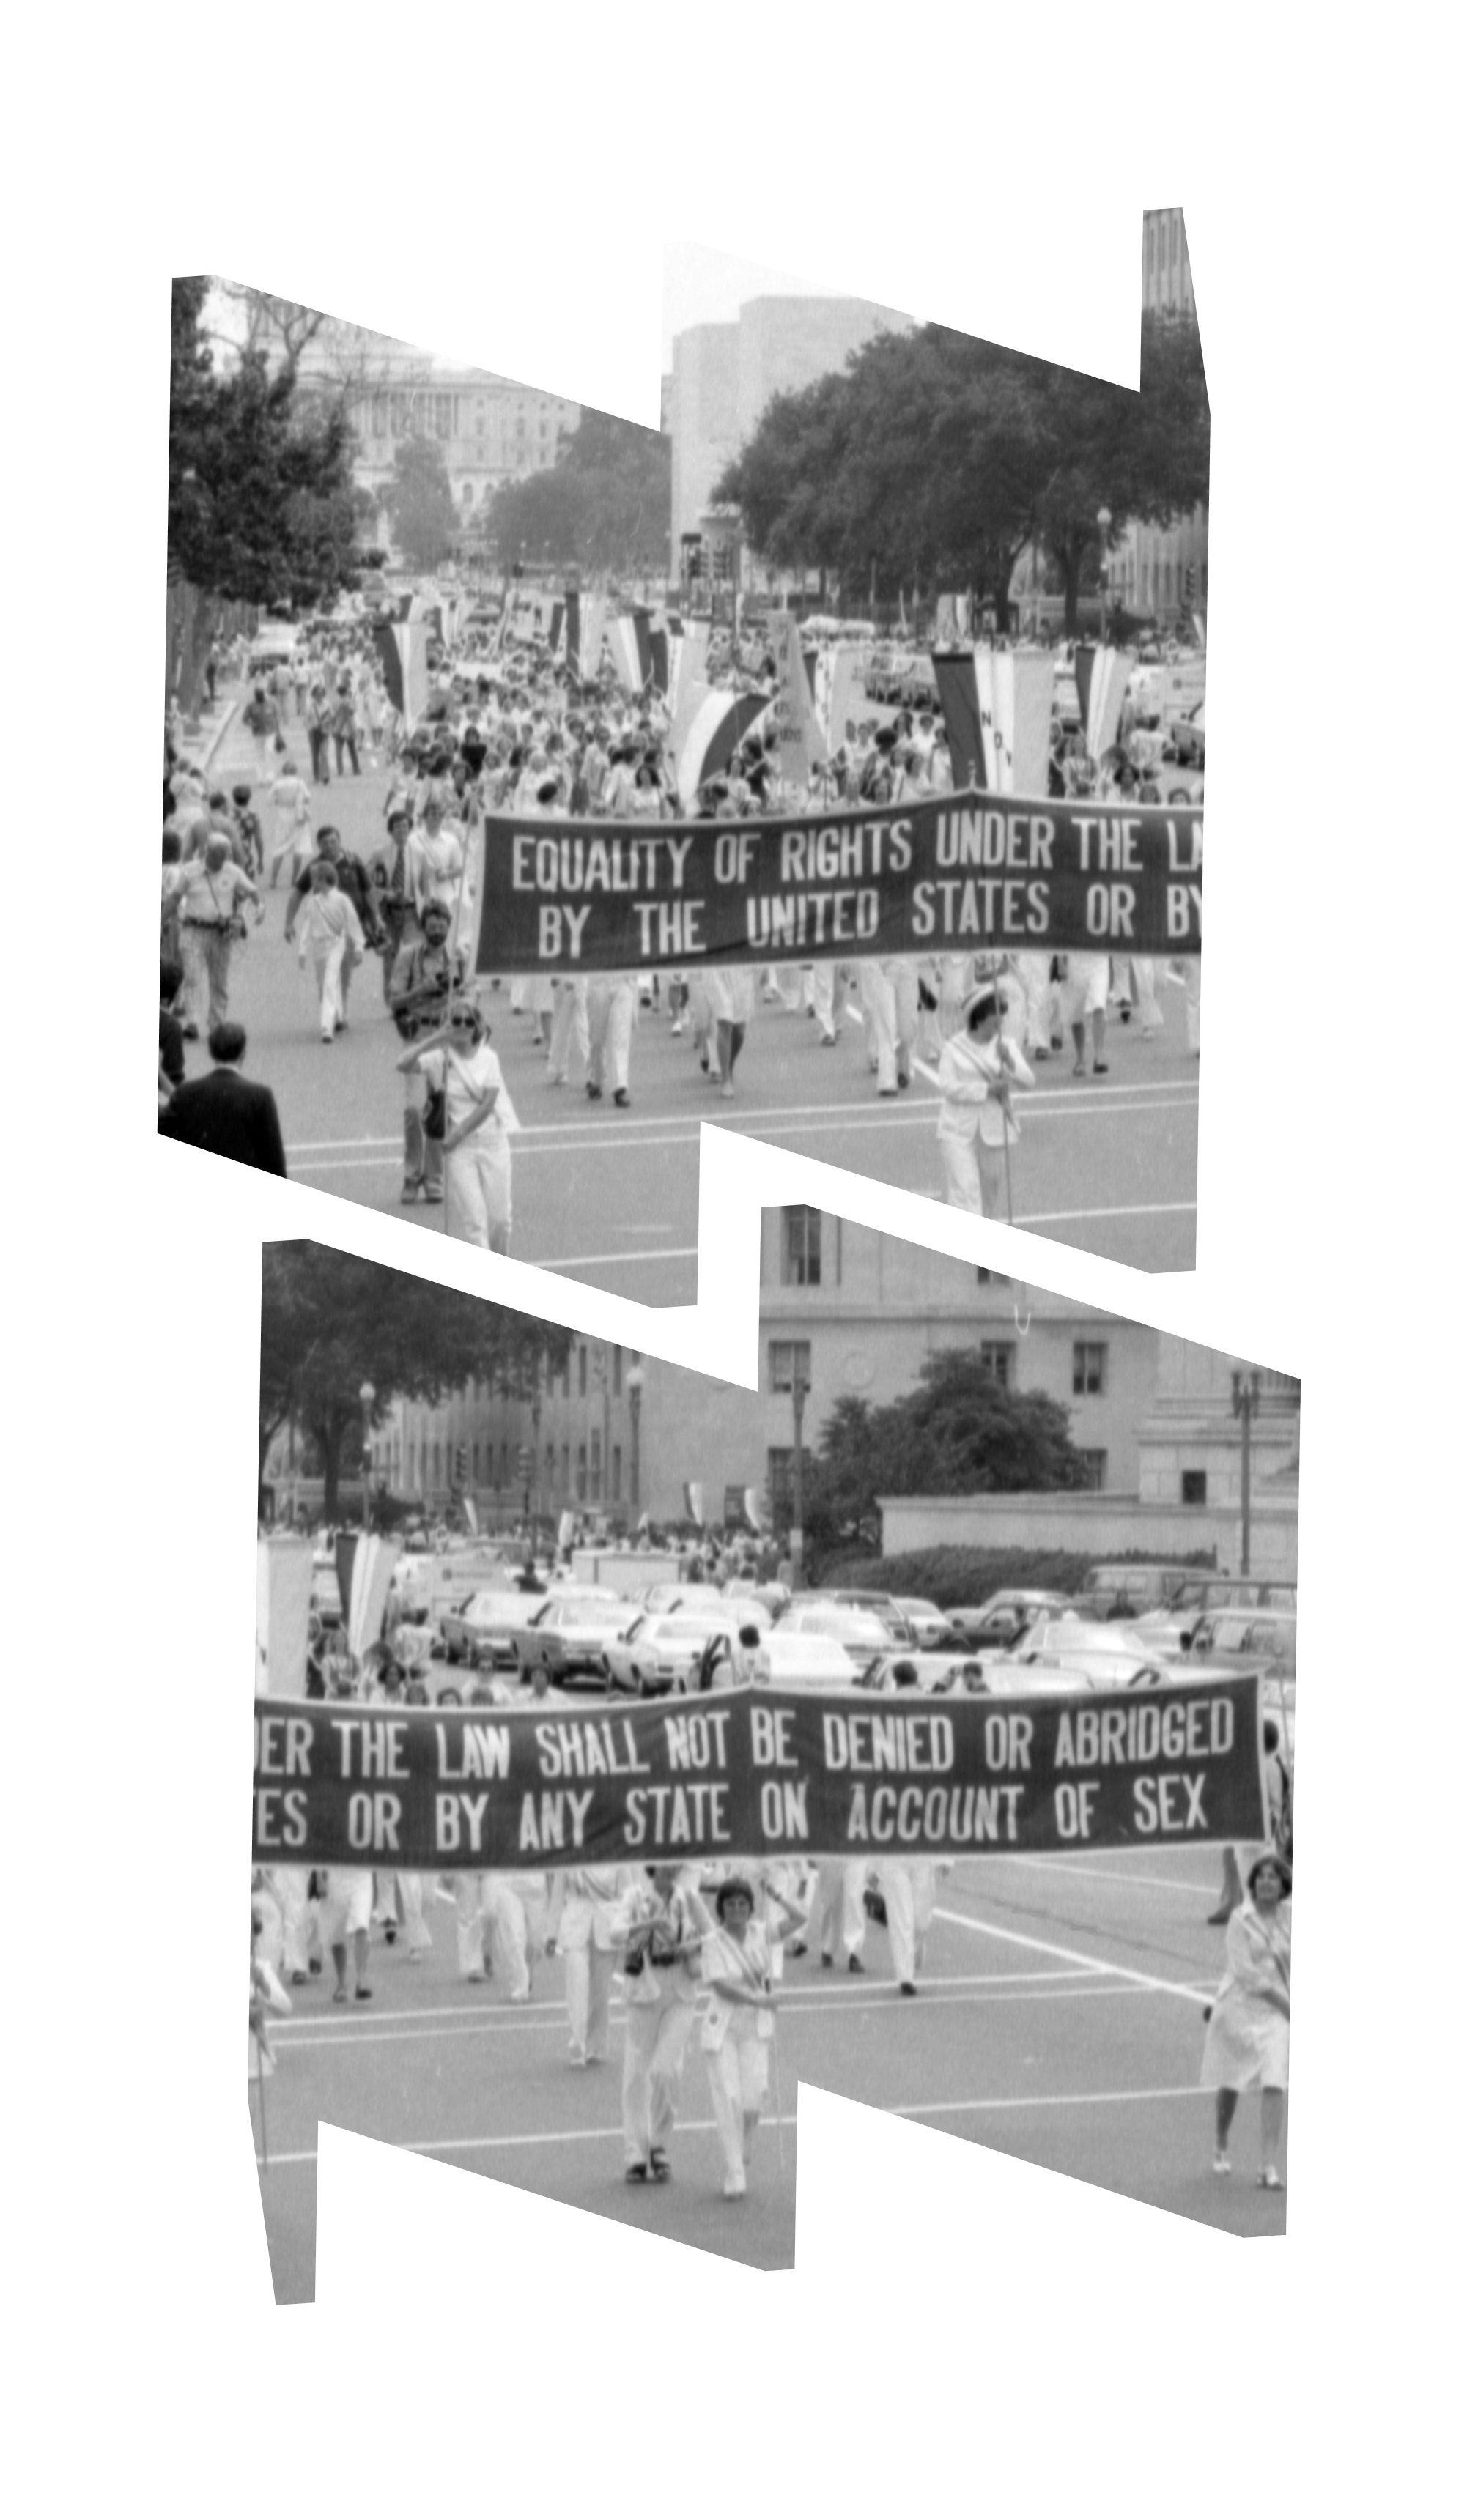 Participants in Alice Paul Memorial March carry a banner with the text of the 19th Amendment: "Equality of Rights Under the Law Shall not be Denied or Abridged by the United States or by any State on Account of Sex," August 26, 1977.